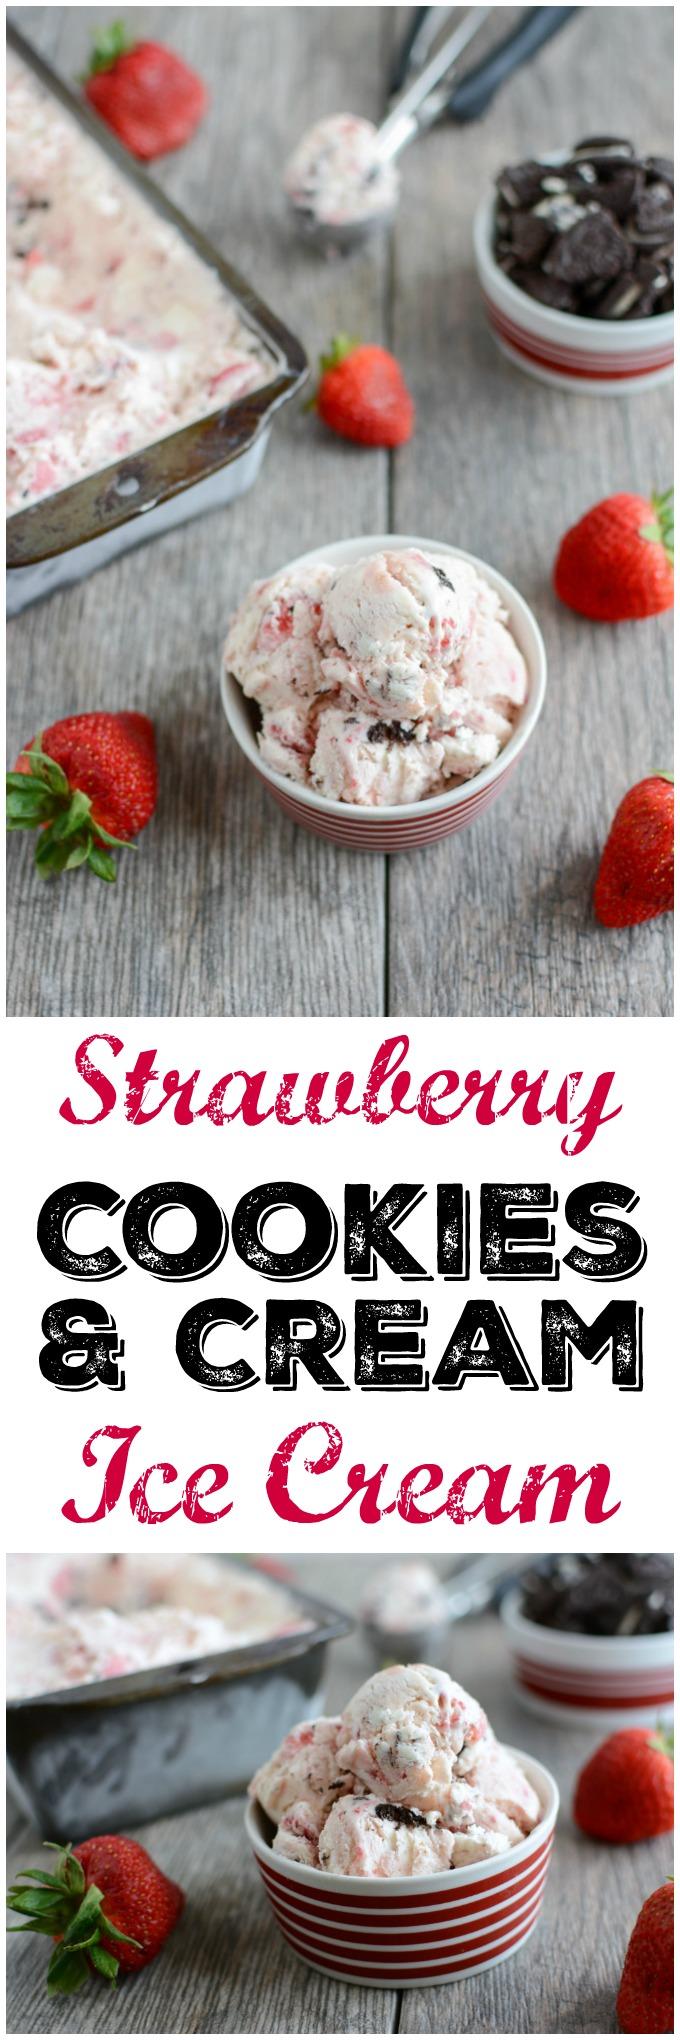 This Strawberry Cookies and Cream Ice Cream is an easy recipe to make without an ice cream maker and is a fun twist on a classic flavor. The perfect summer dessert!